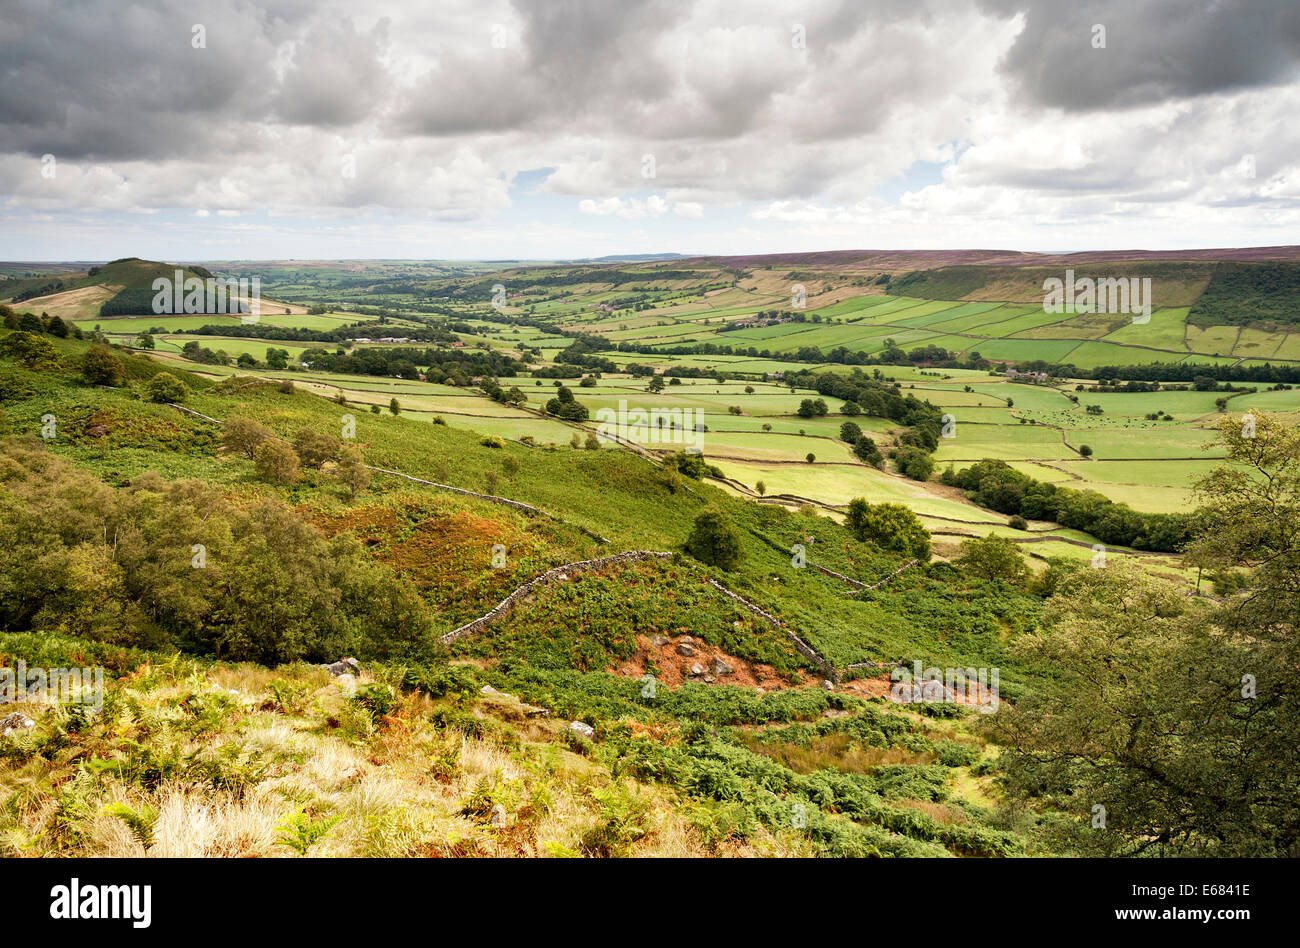 Looking towards Little Fryup Dale and Fairy Cross plantation Stock Photo